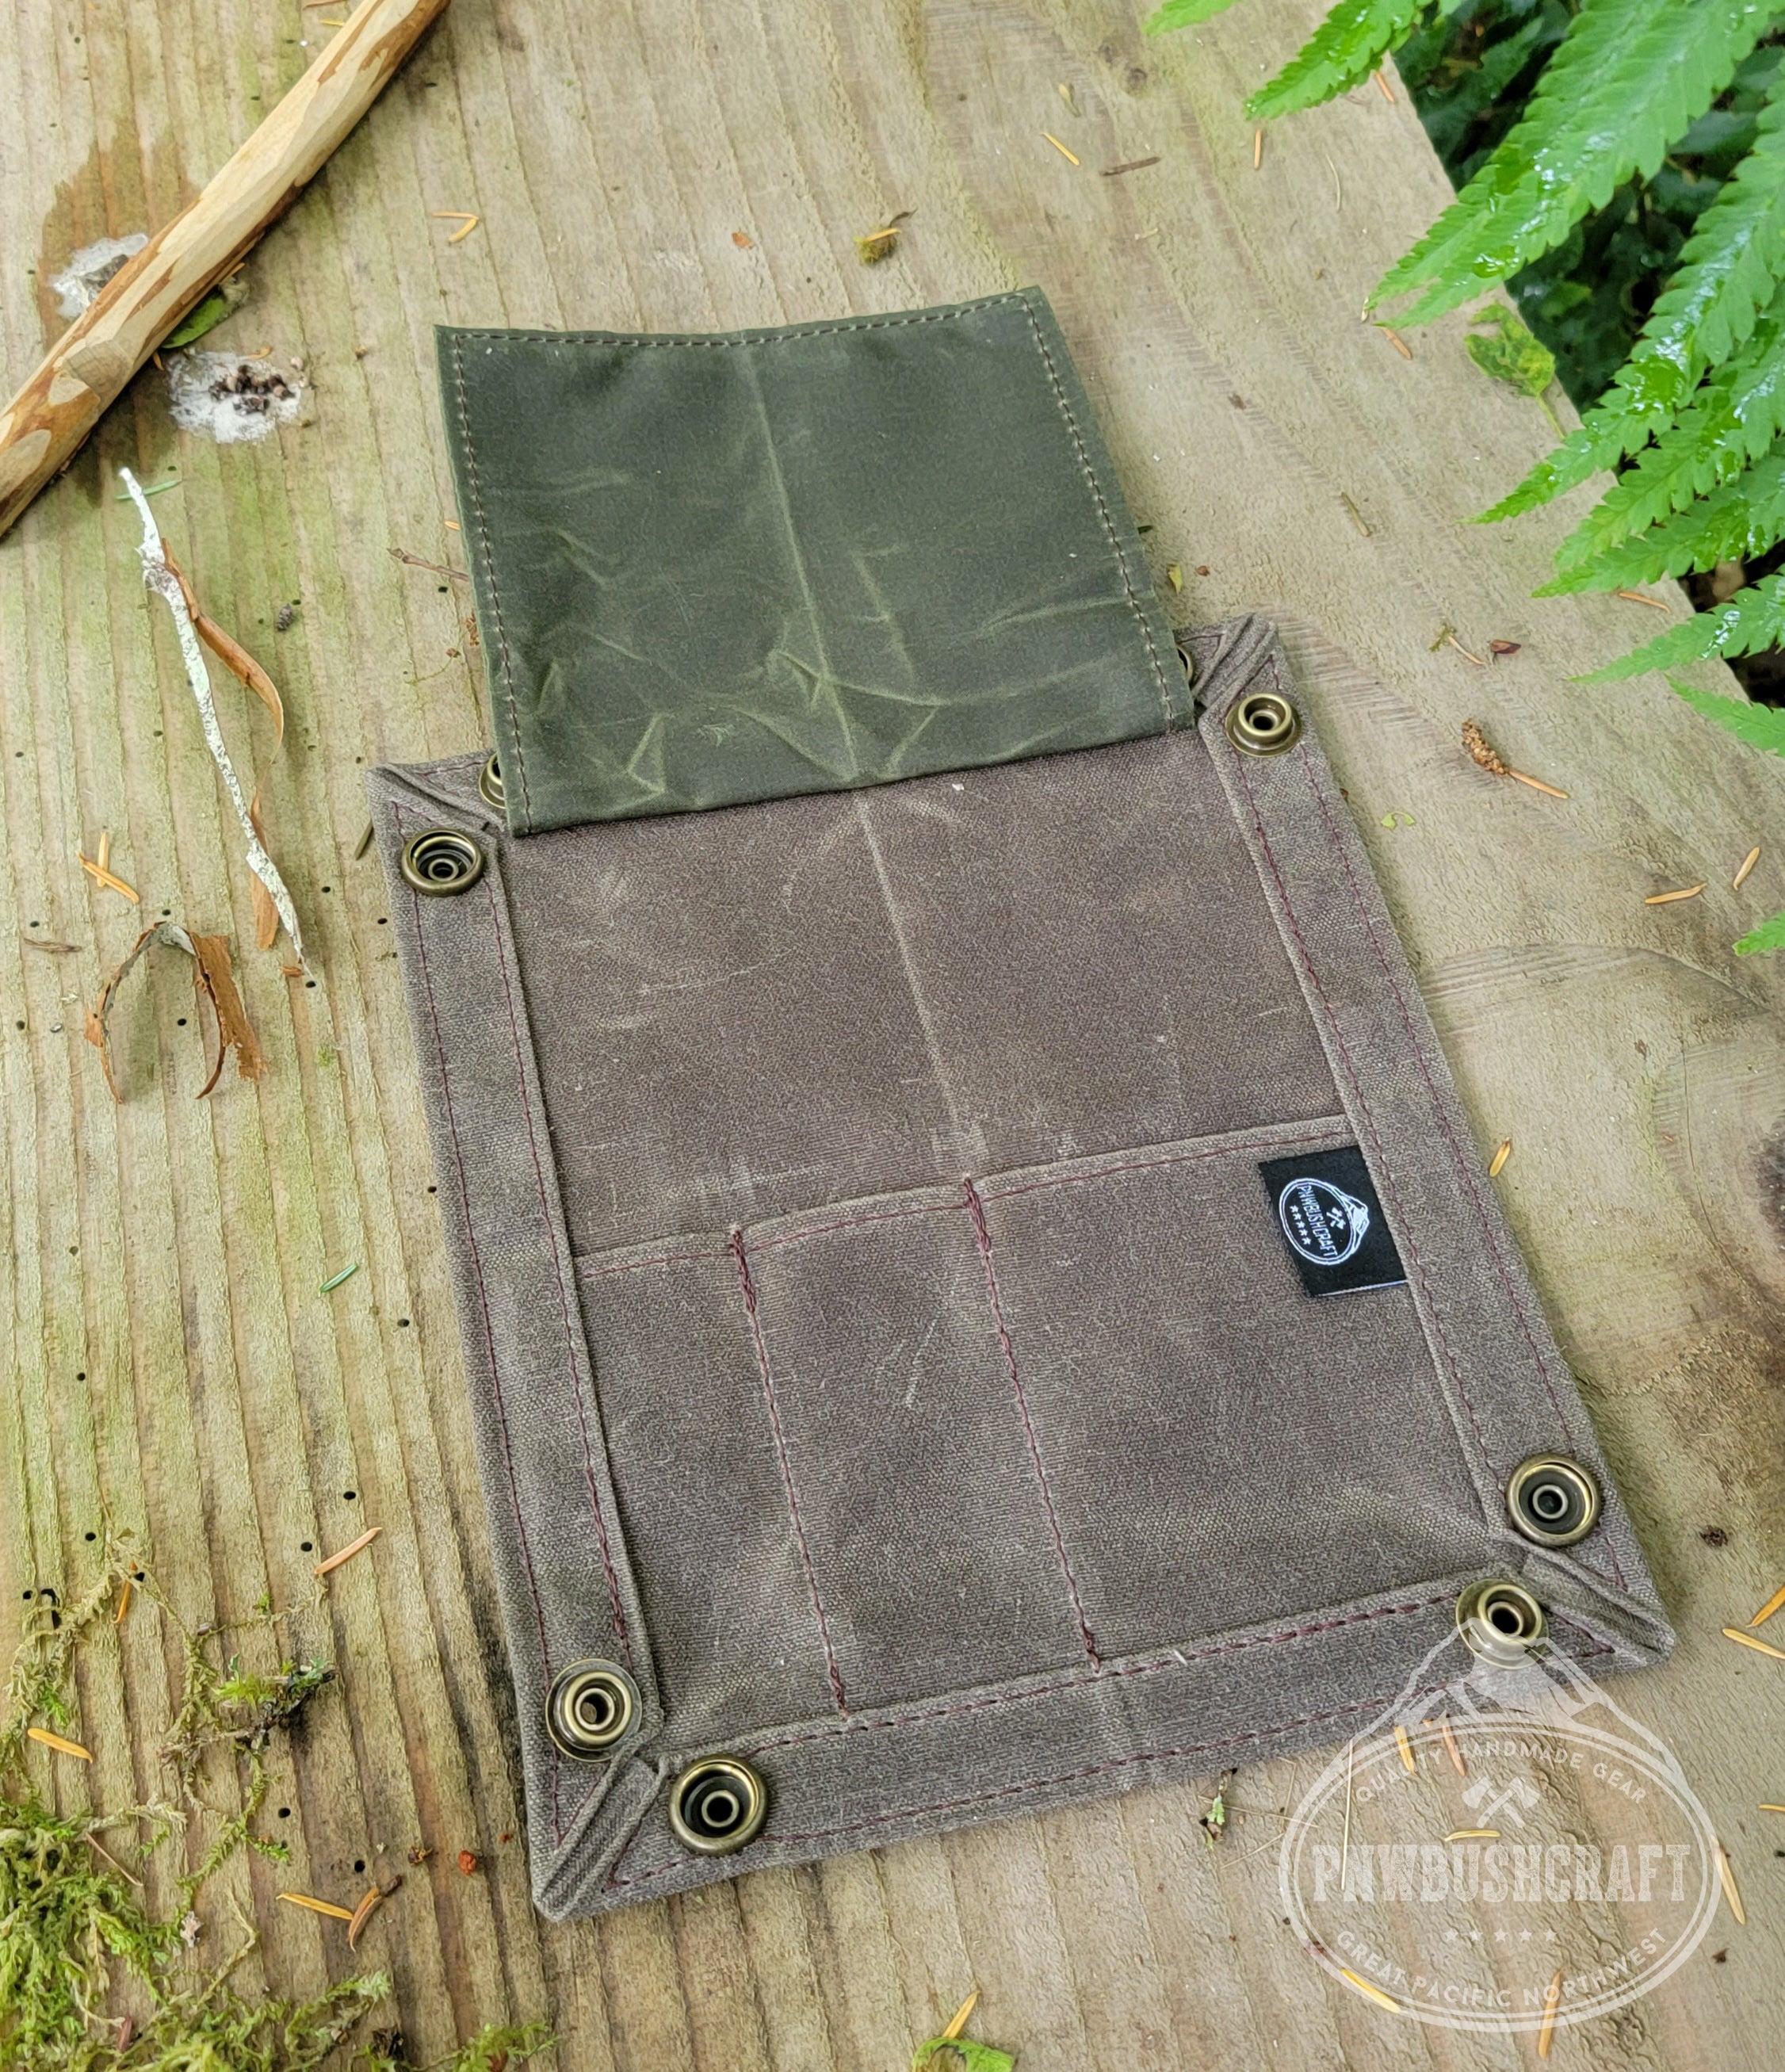 EDC Pipe and Accessories  Waxed Canvas Travel Tray for your Gear - Made to Order